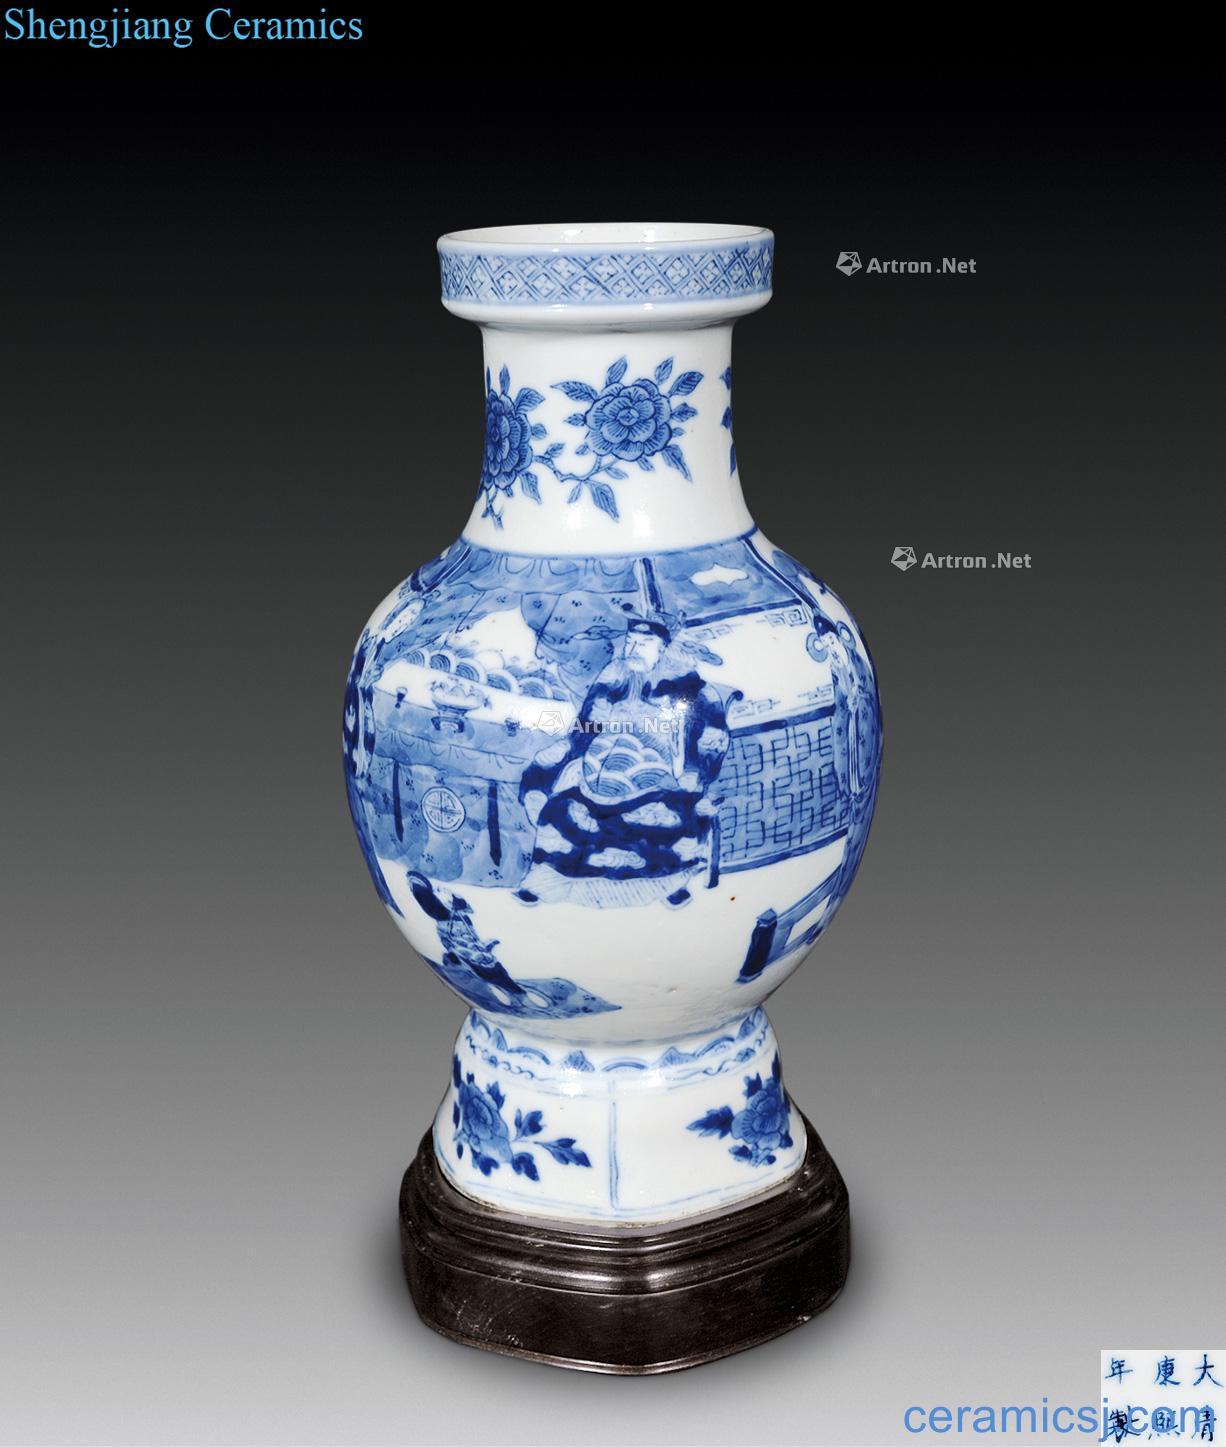 The qing emperor kangxi porcelain medallion in the narrative position